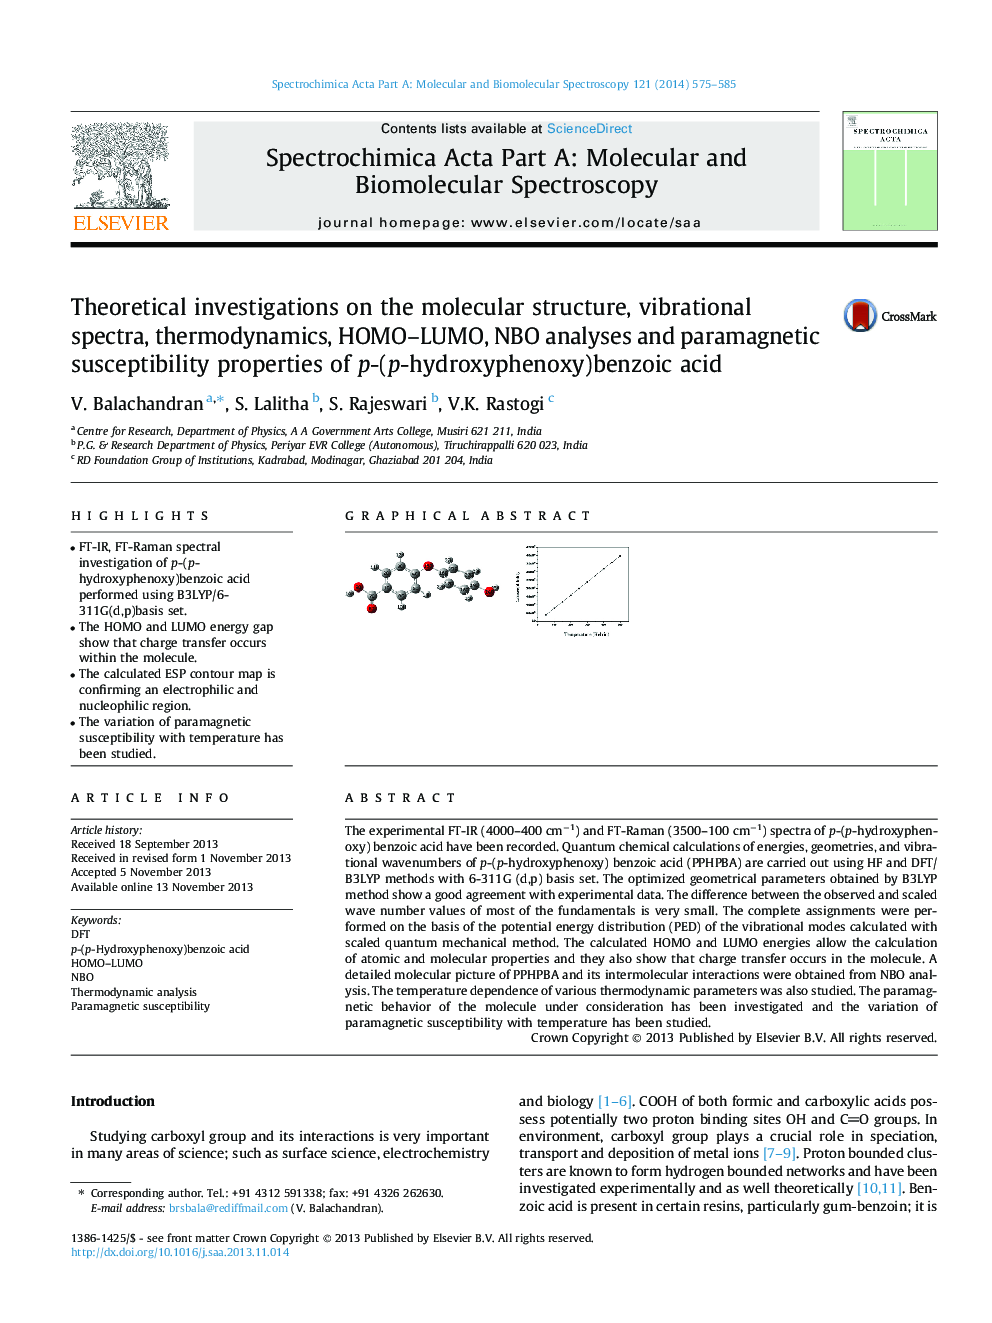 Theoretical investigations on the molecular structure, vibrational spectra, thermodynamics, HOMO-LUMO, NBO analyses and paramagnetic susceptibility properties of p-(p-hydroxyphenoxy)benzoic acid